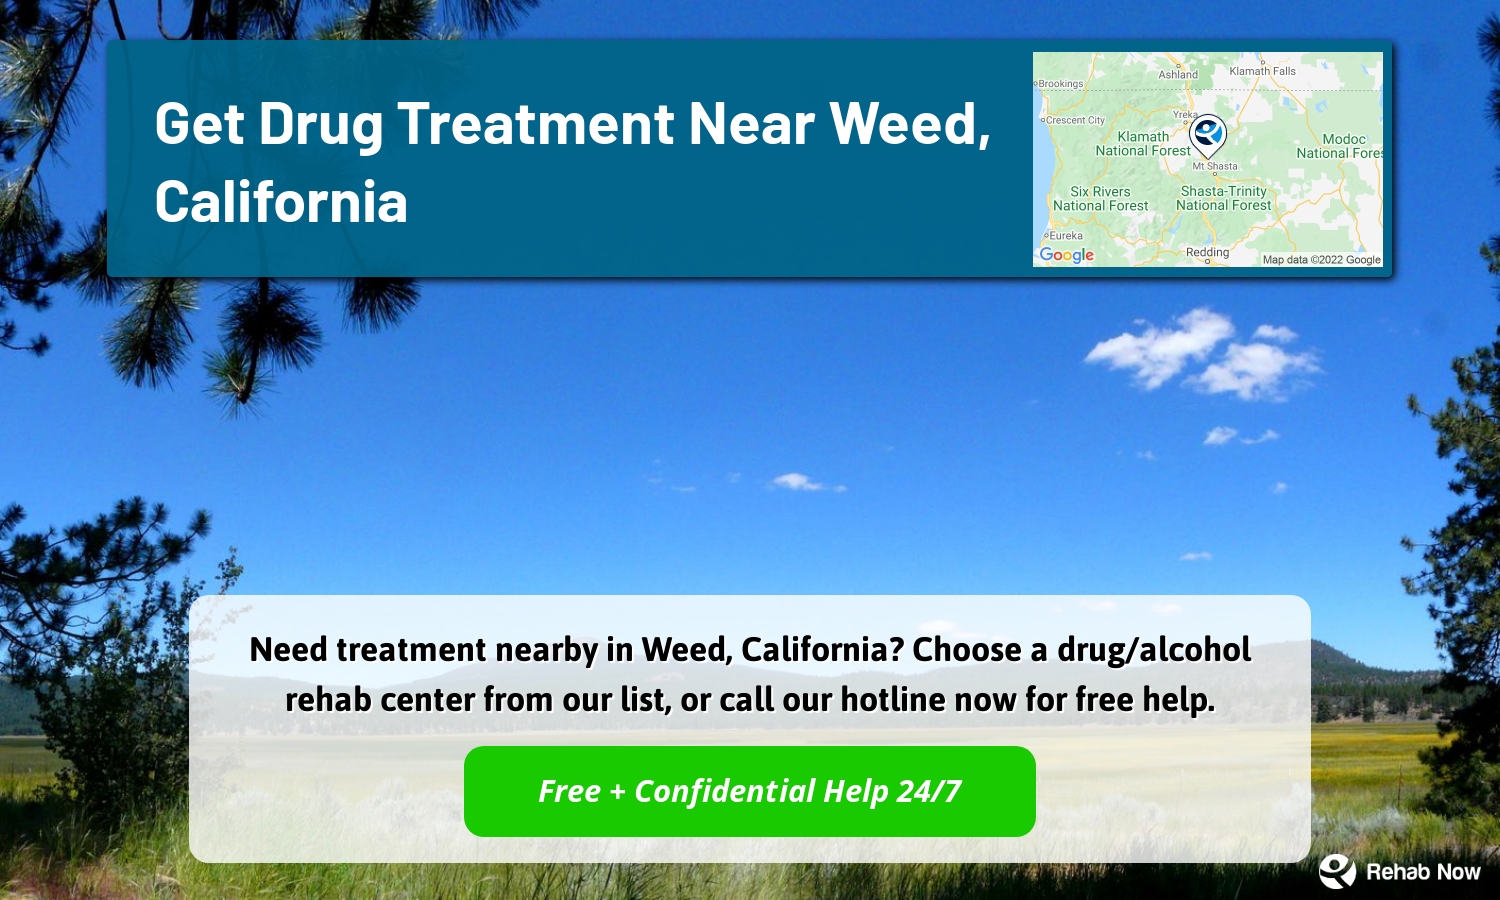 Need treatment nearby in Weed, California? Choose a drug/alcohol rehab center from our list, or call our hotline now for free help.